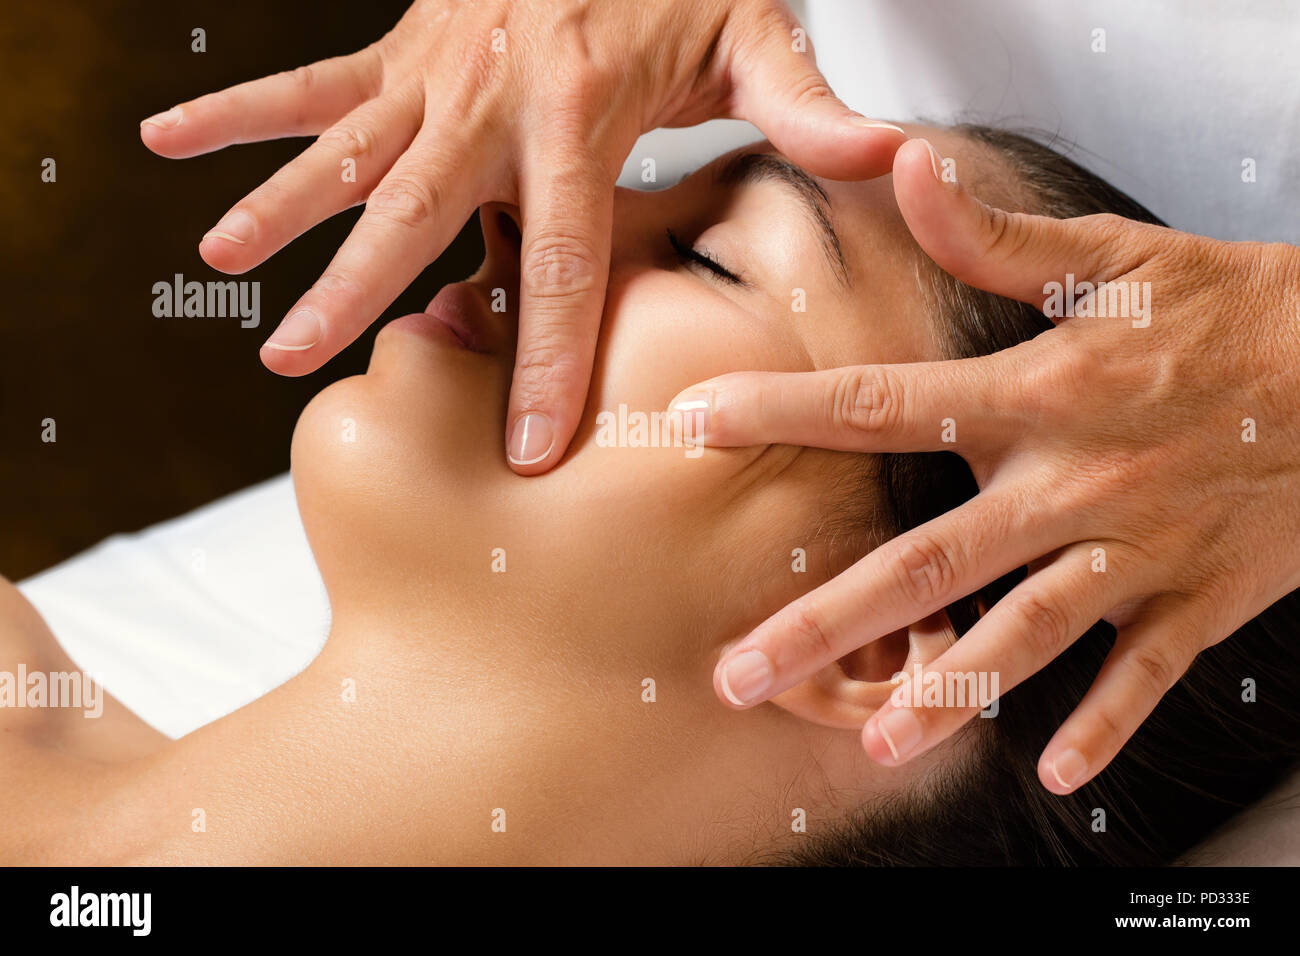 Close up portrait of woman at beauty treatment in spa.Therapist massaging and stretching female cheek for product penetration. Stock Photo